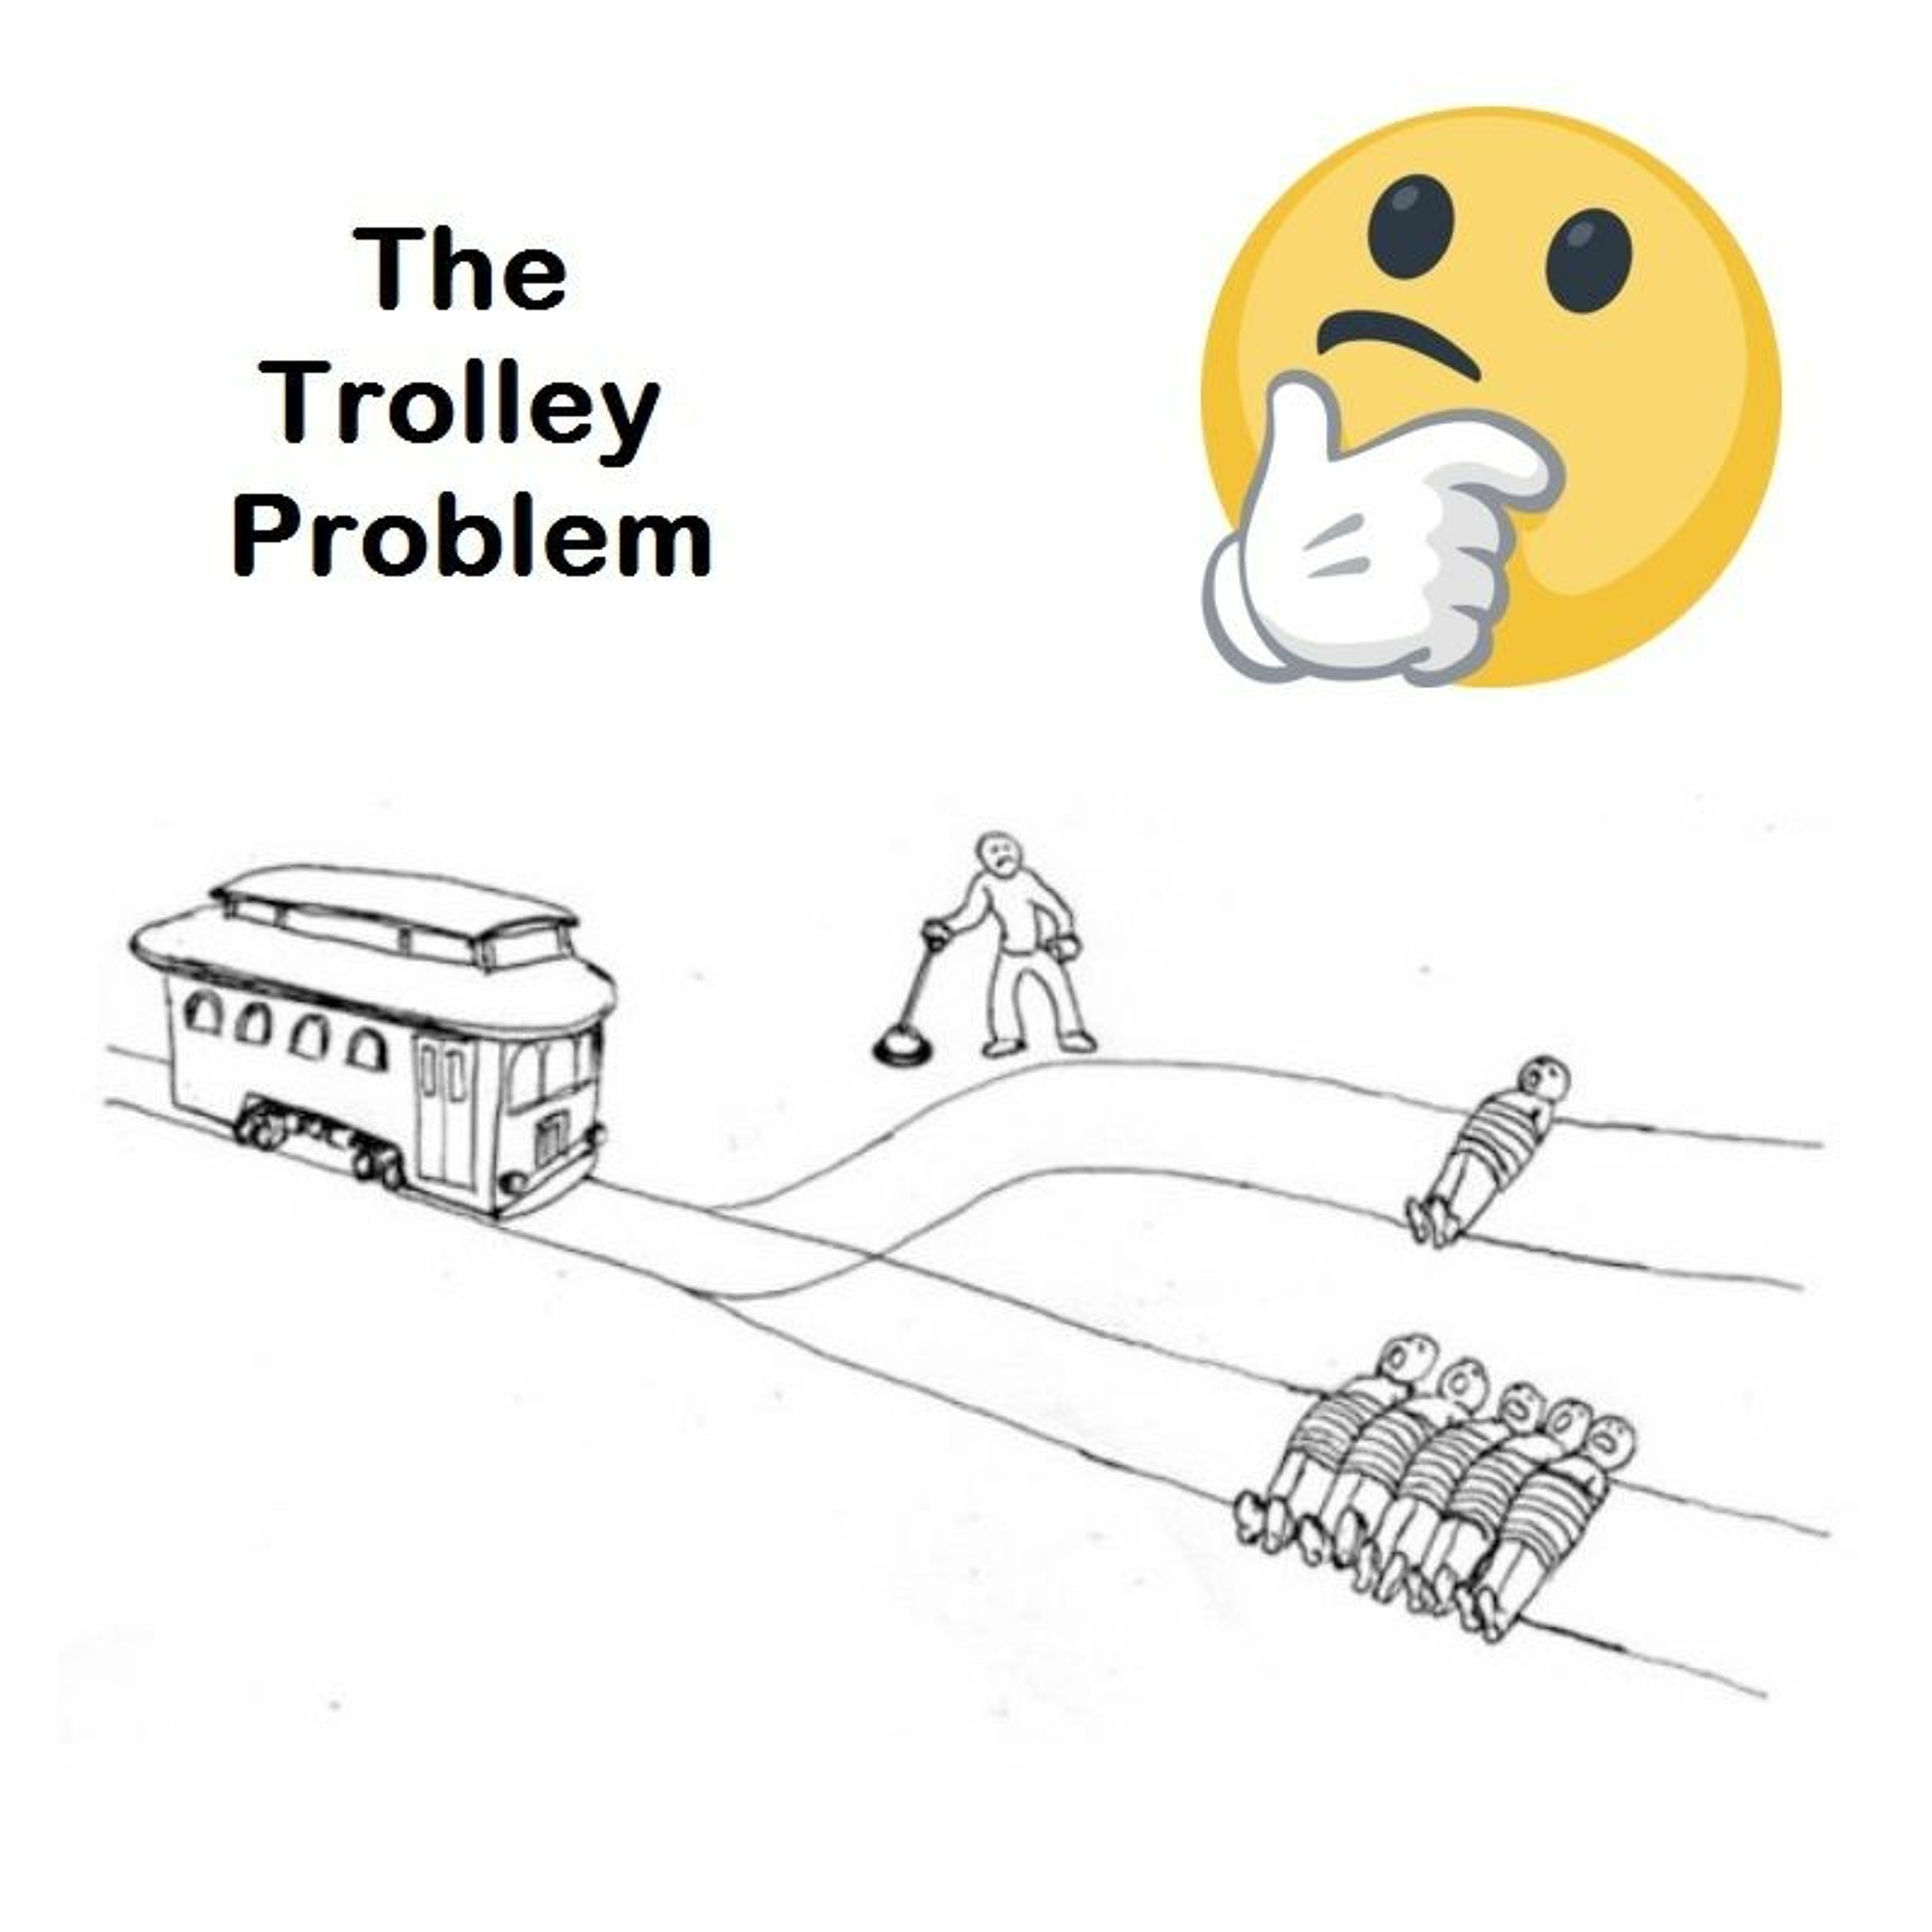 010 - The Trolley Problem